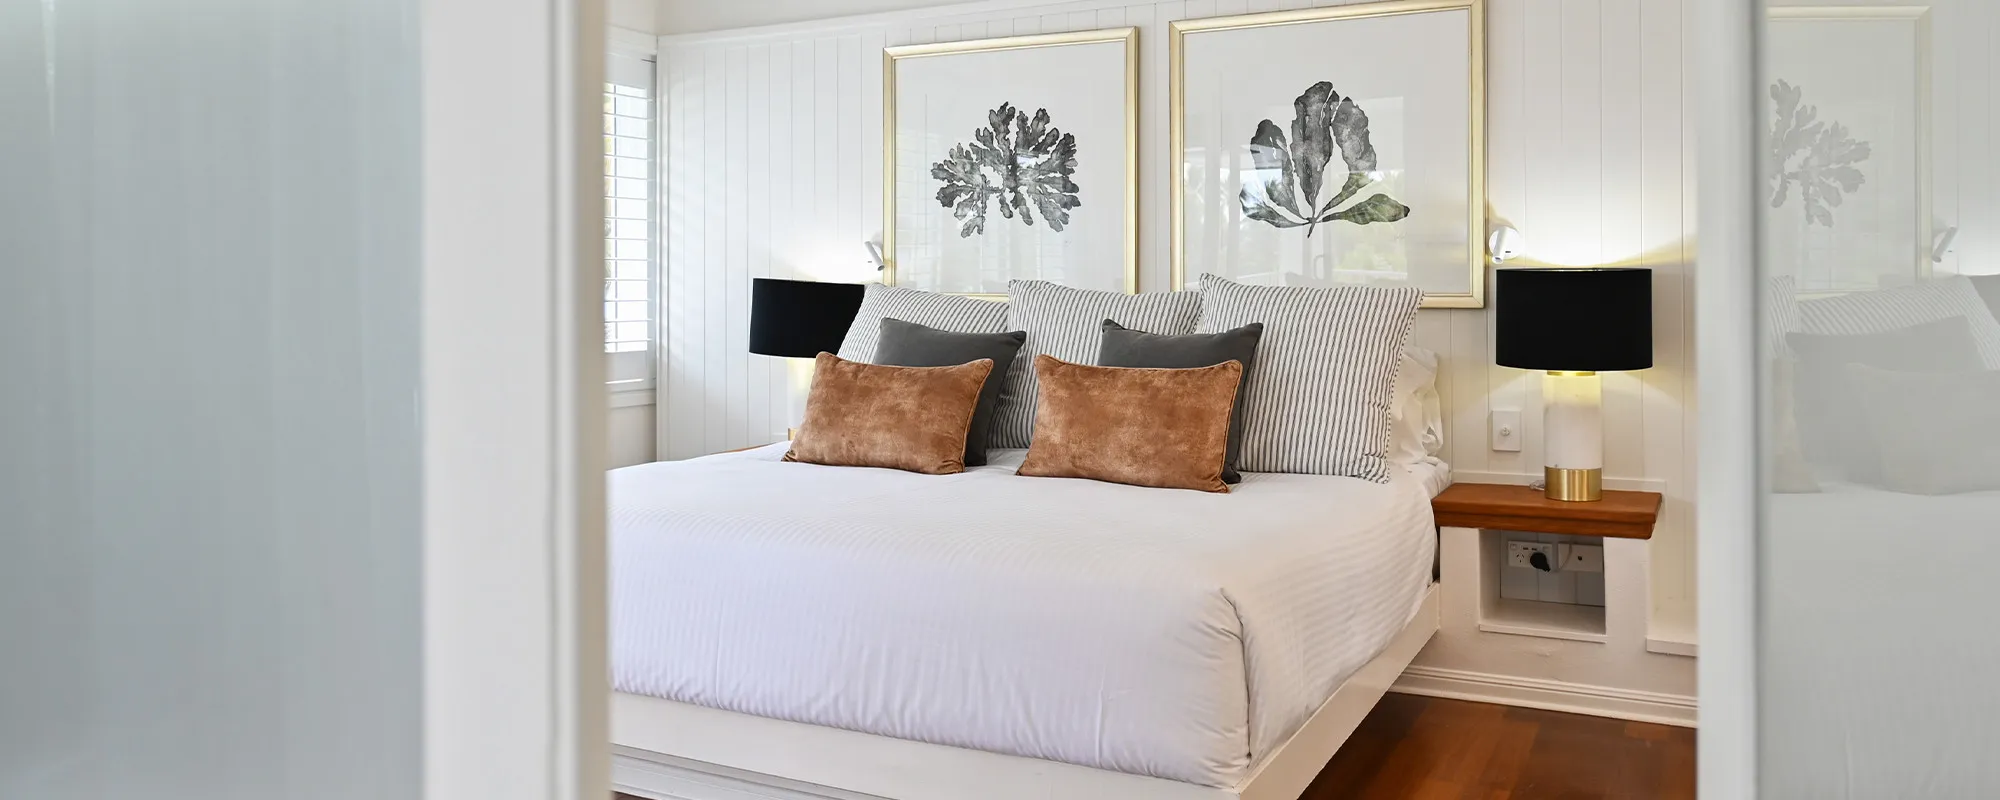 Alamanda Palm Cove by Lancemore Boutique Luxury Accommodation Four Bedroom Apartment 2000 x 800 9